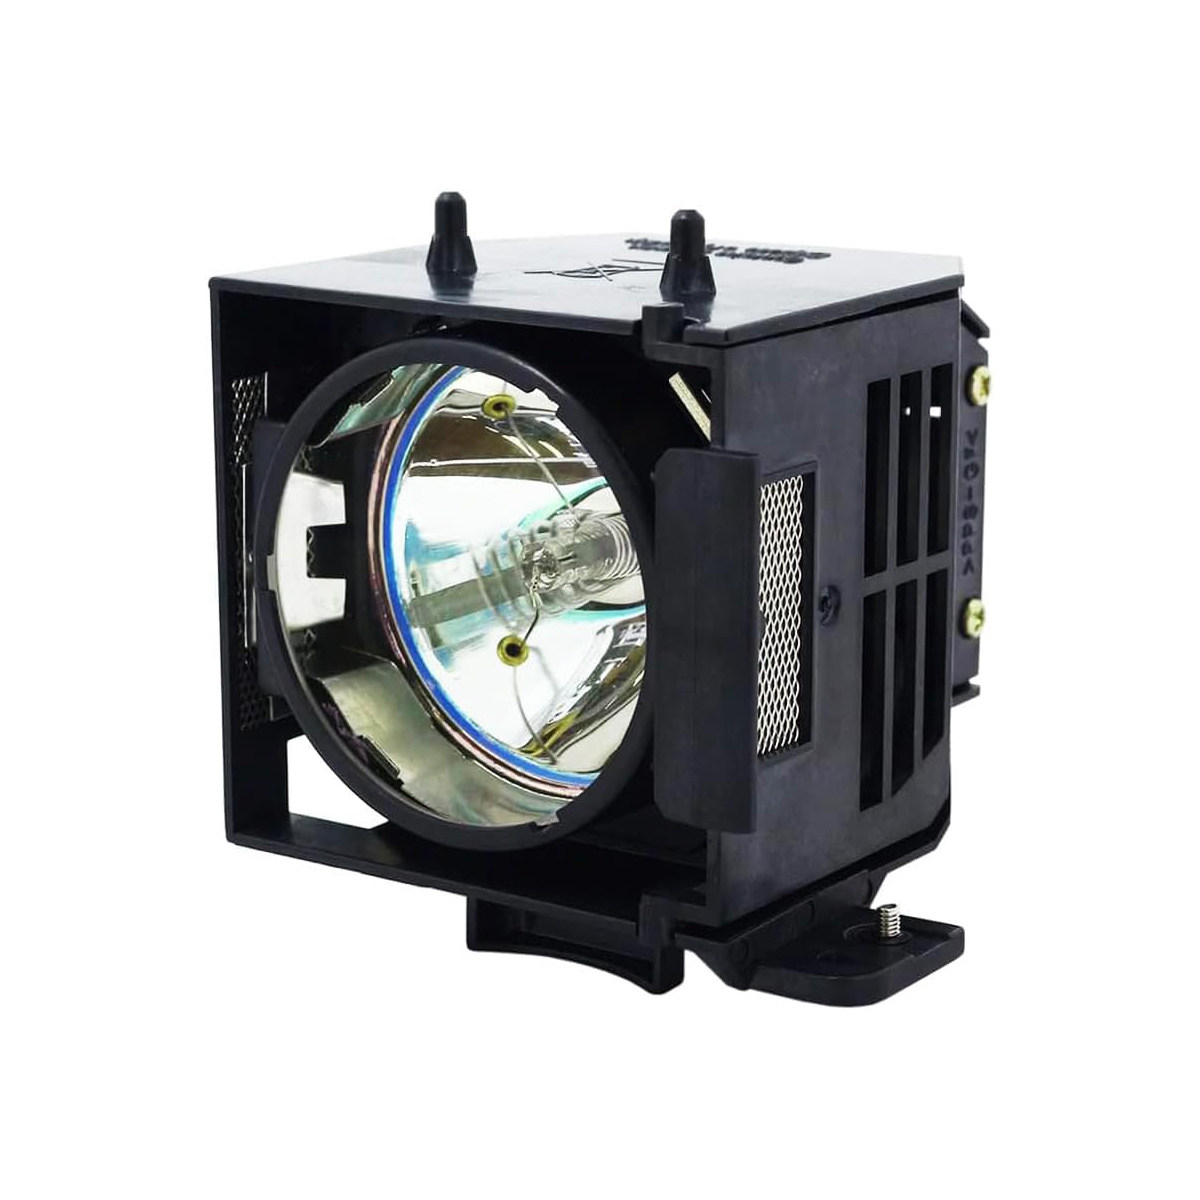 Replacement Projector lamp ELPLP45 For Epson EMP 61101 EMP-6110 EMP-61101